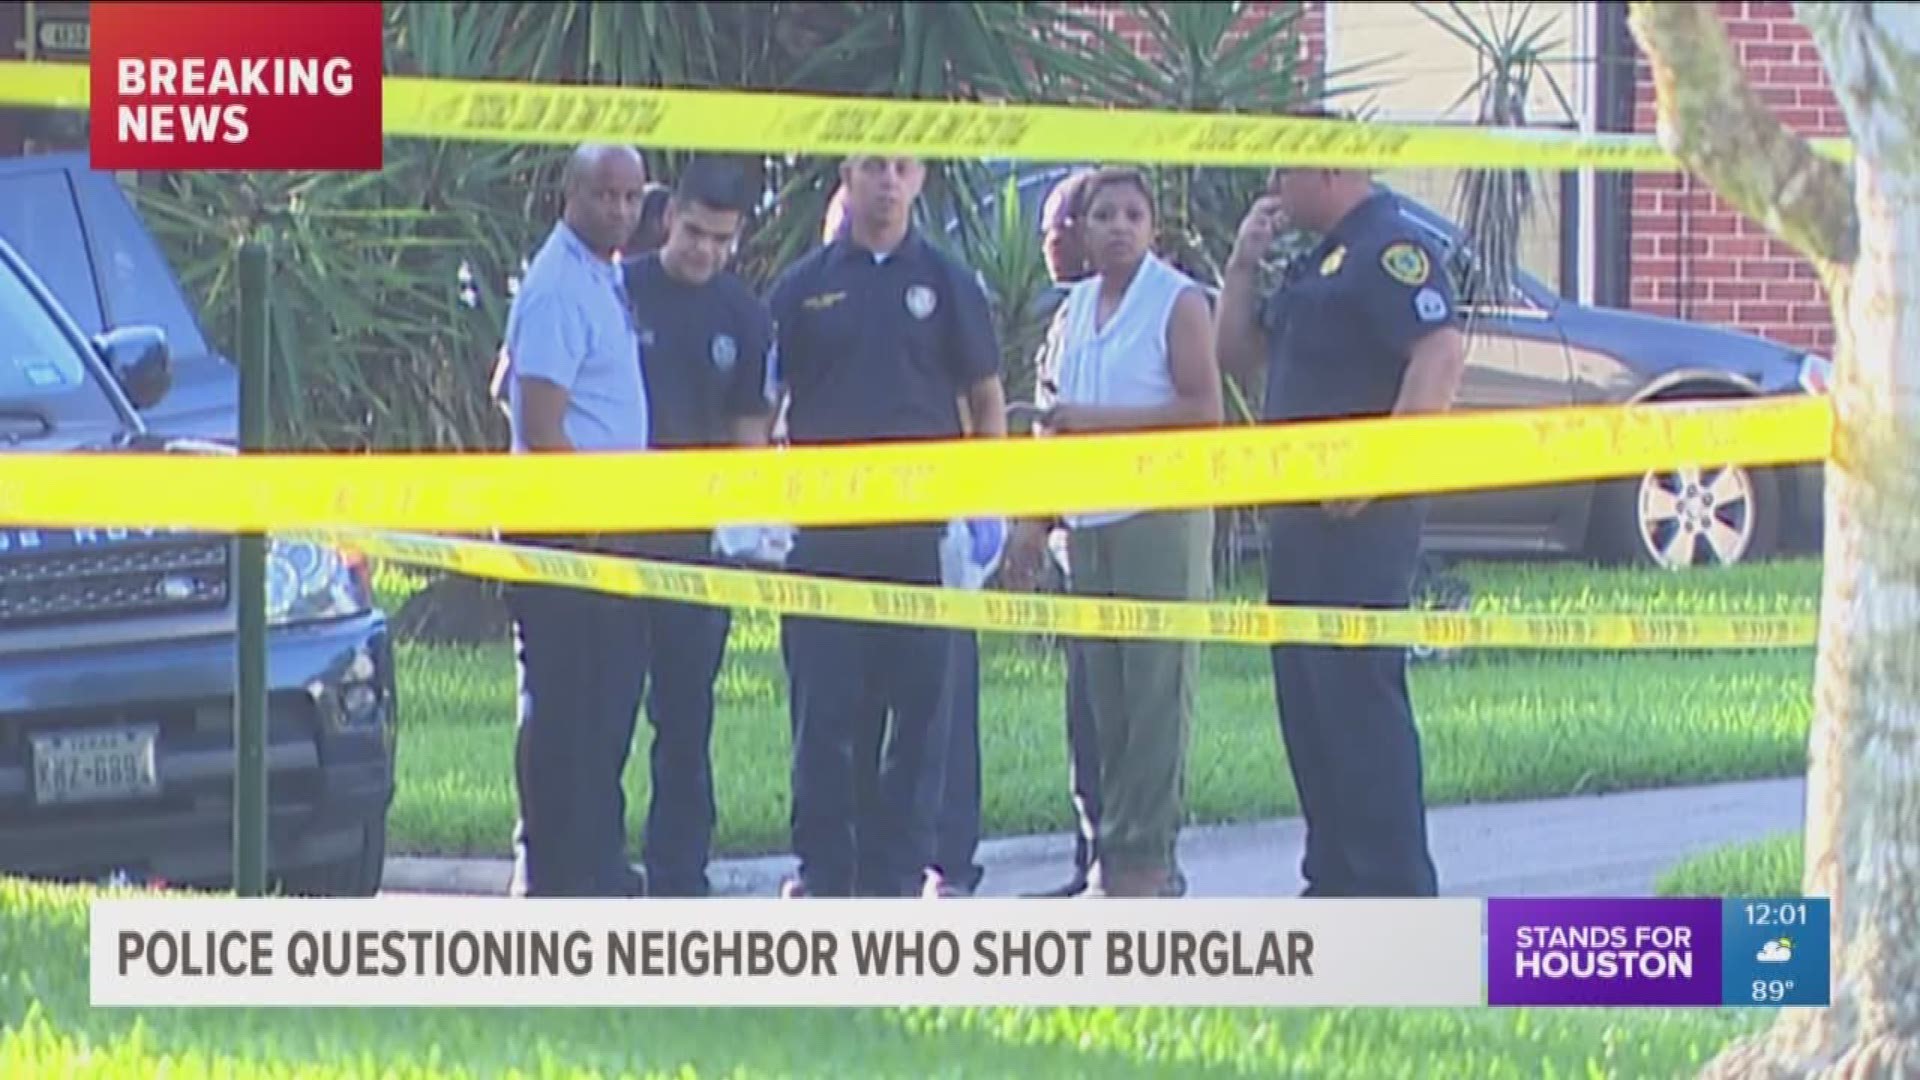 Police say a suspected burglar was shot by a neighbor outside a southeast Houston home on Tuesday morning.